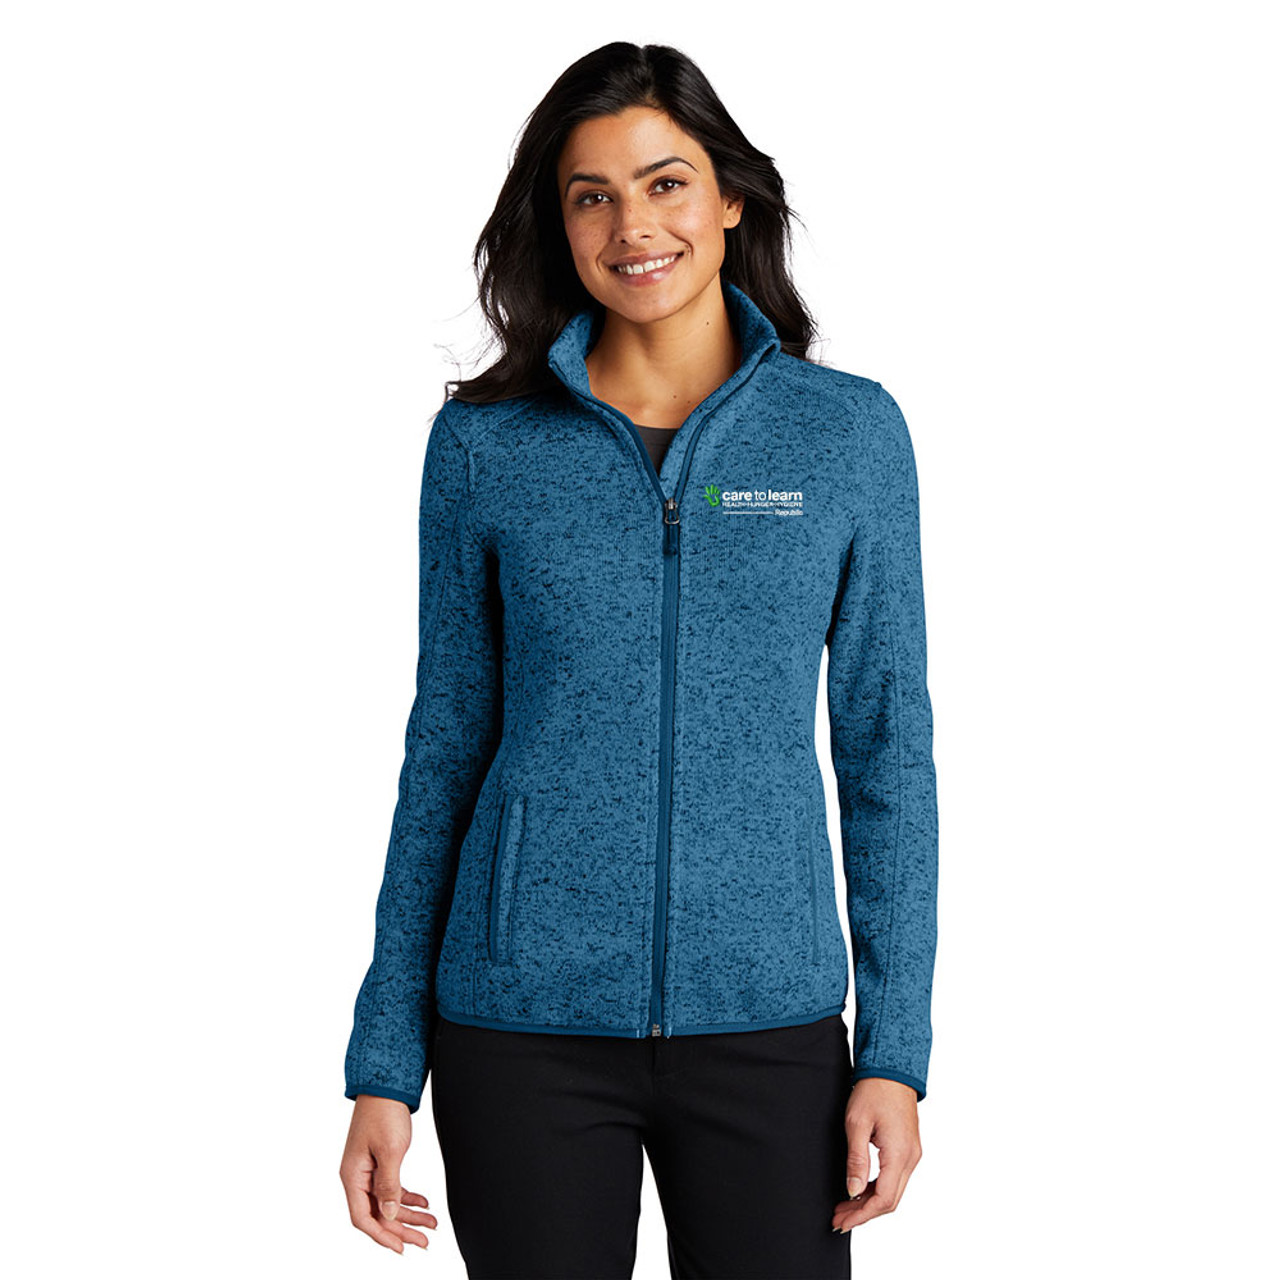 Care to Learn Republic EMBROIDERED Ladies Sweater Fleece Jacket - Medium  Blue Heather